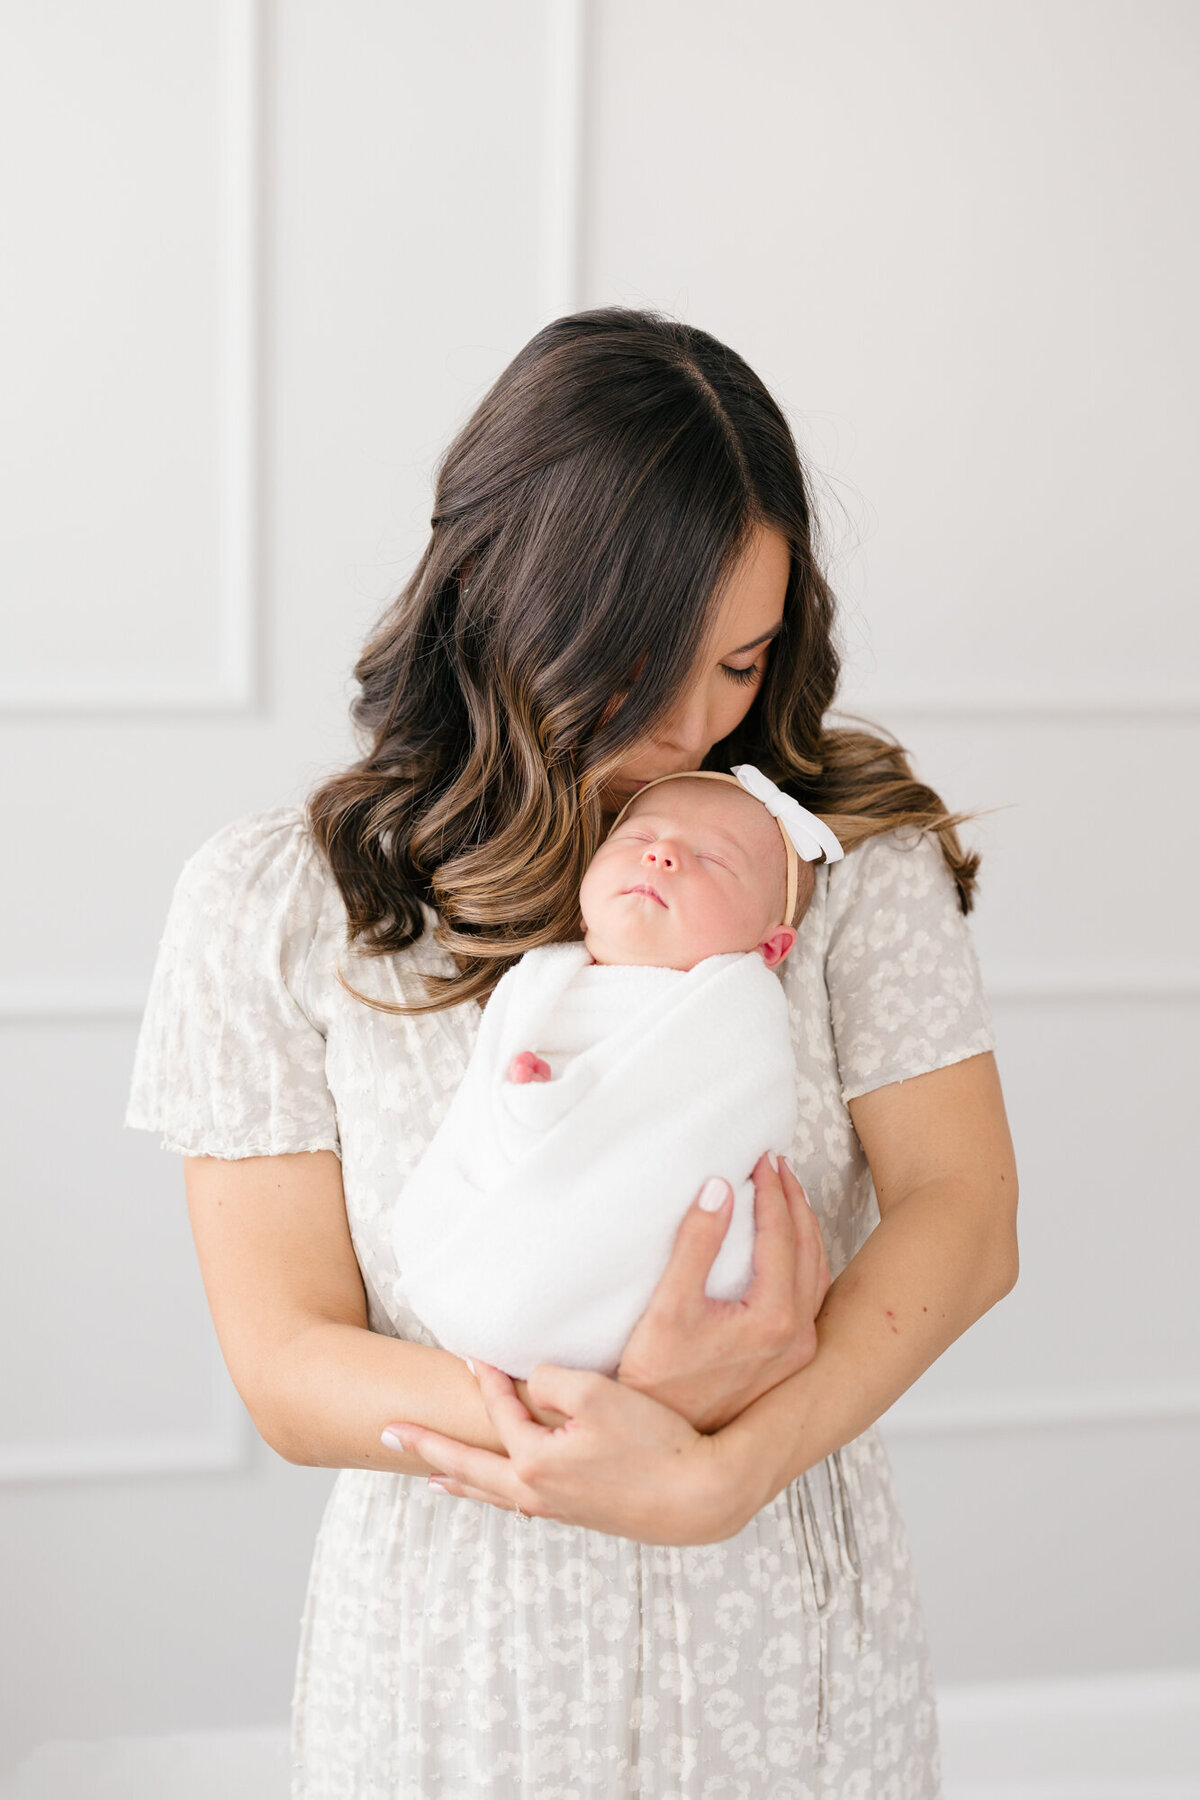 New mom cradling her sleeping newborn swaddled in white by Missy Marshall Louisville Photographer